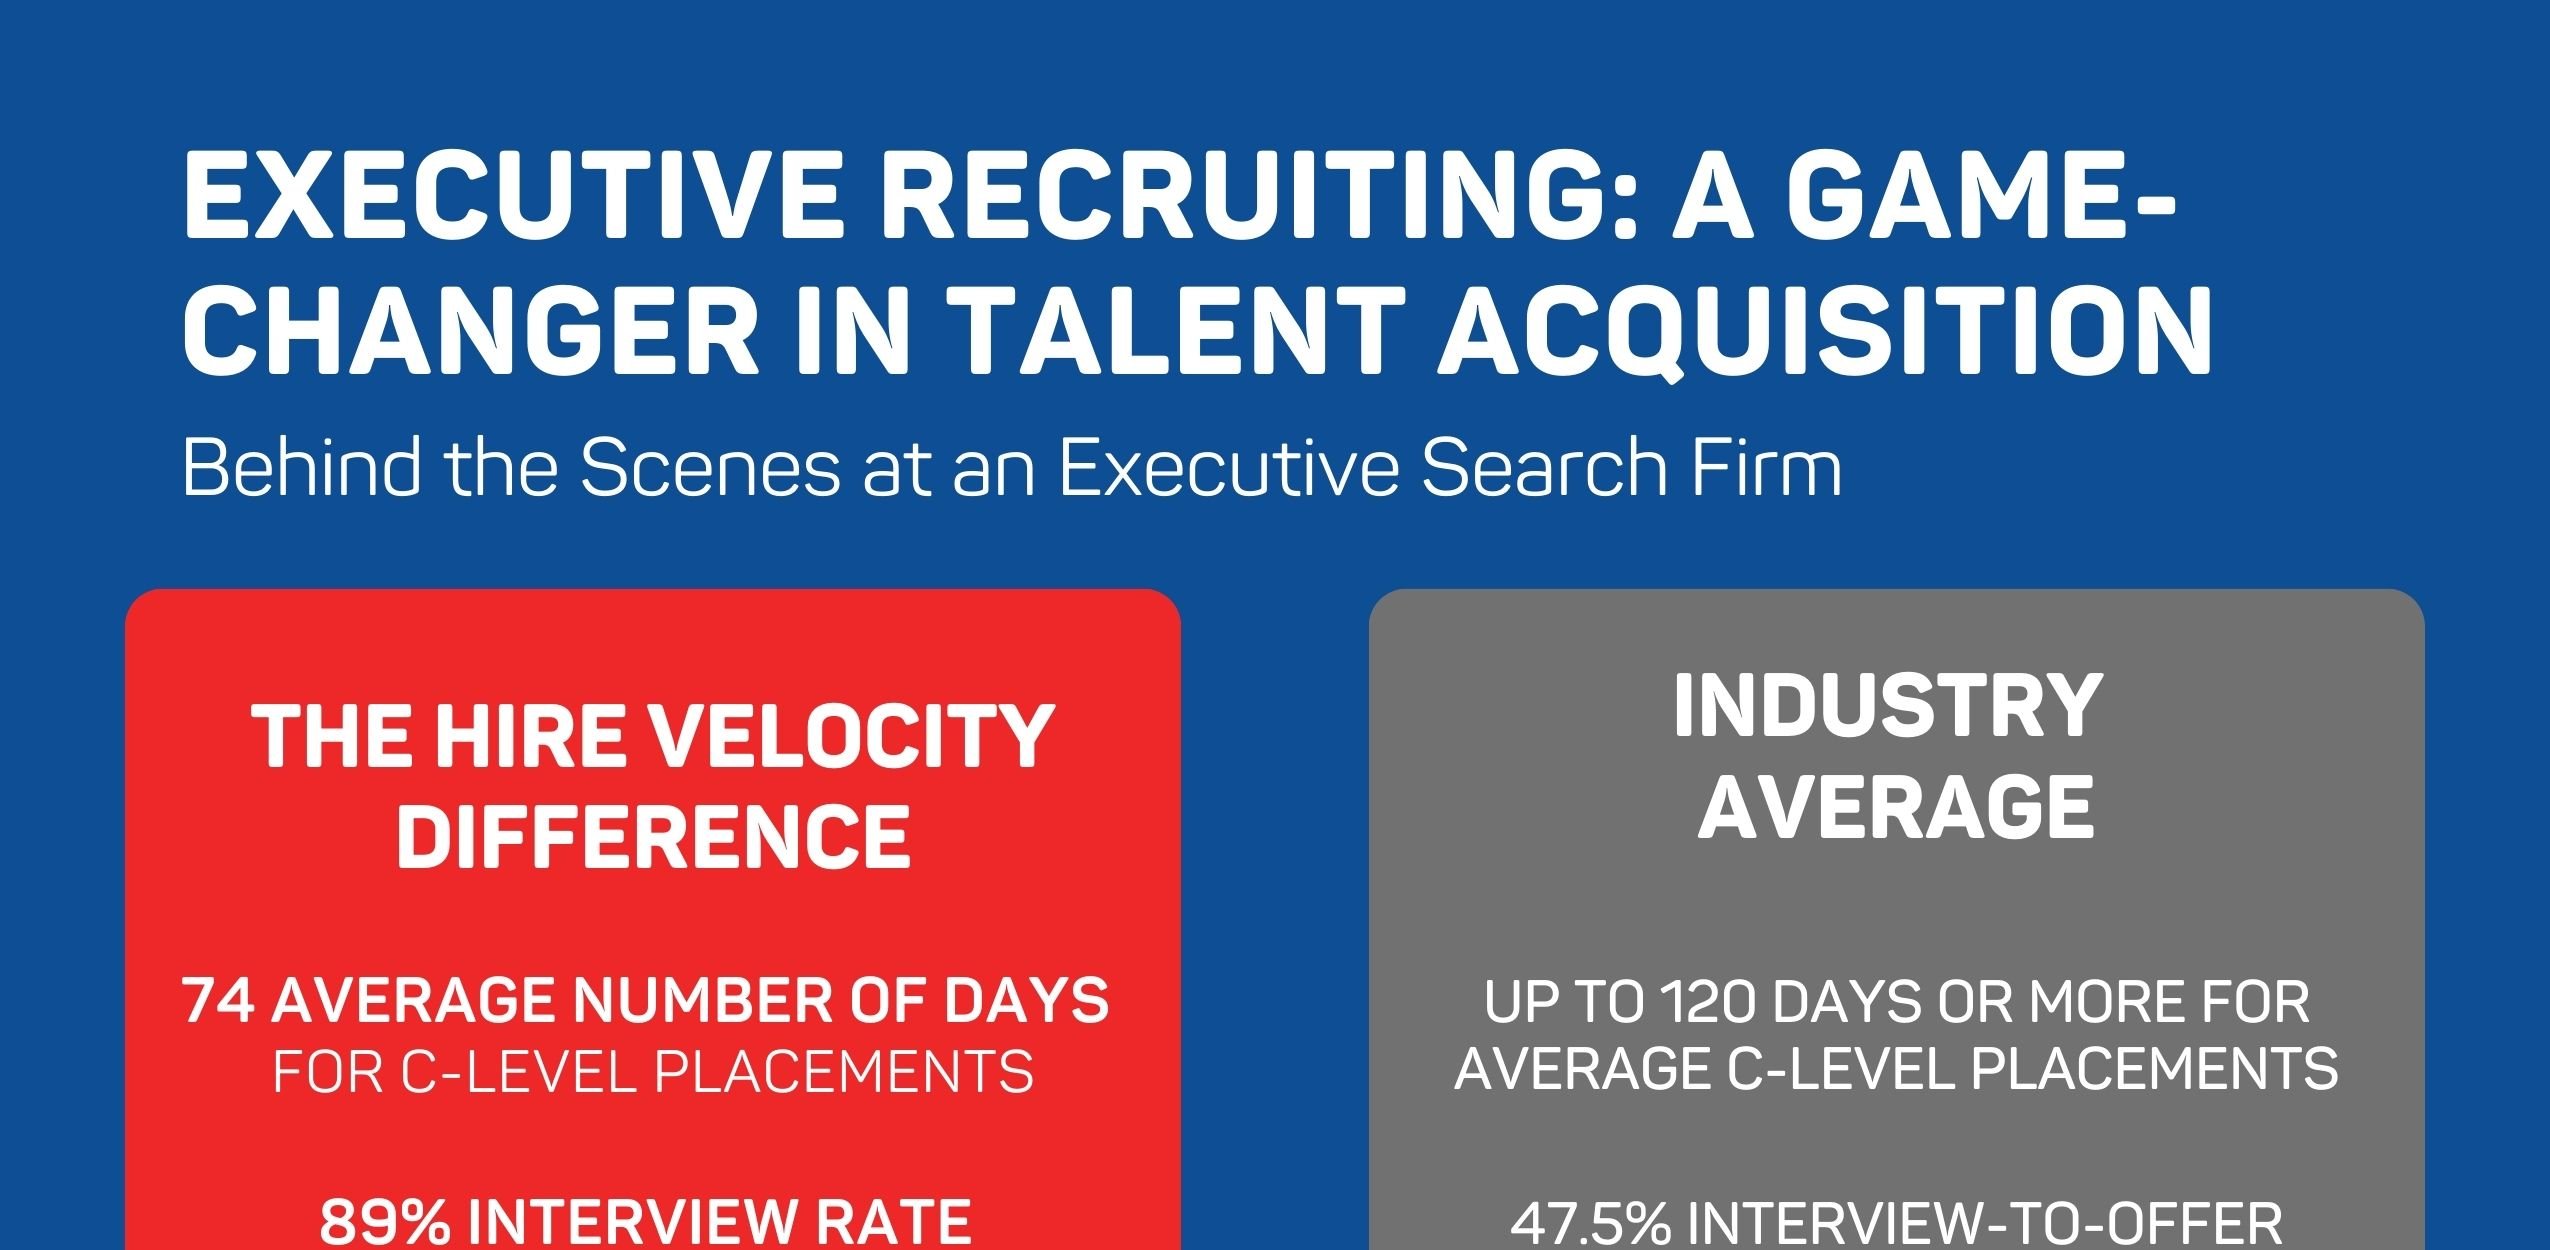 Executive Recruiting A Game-Changer in Talent Acquisition_Infographic Overview-1